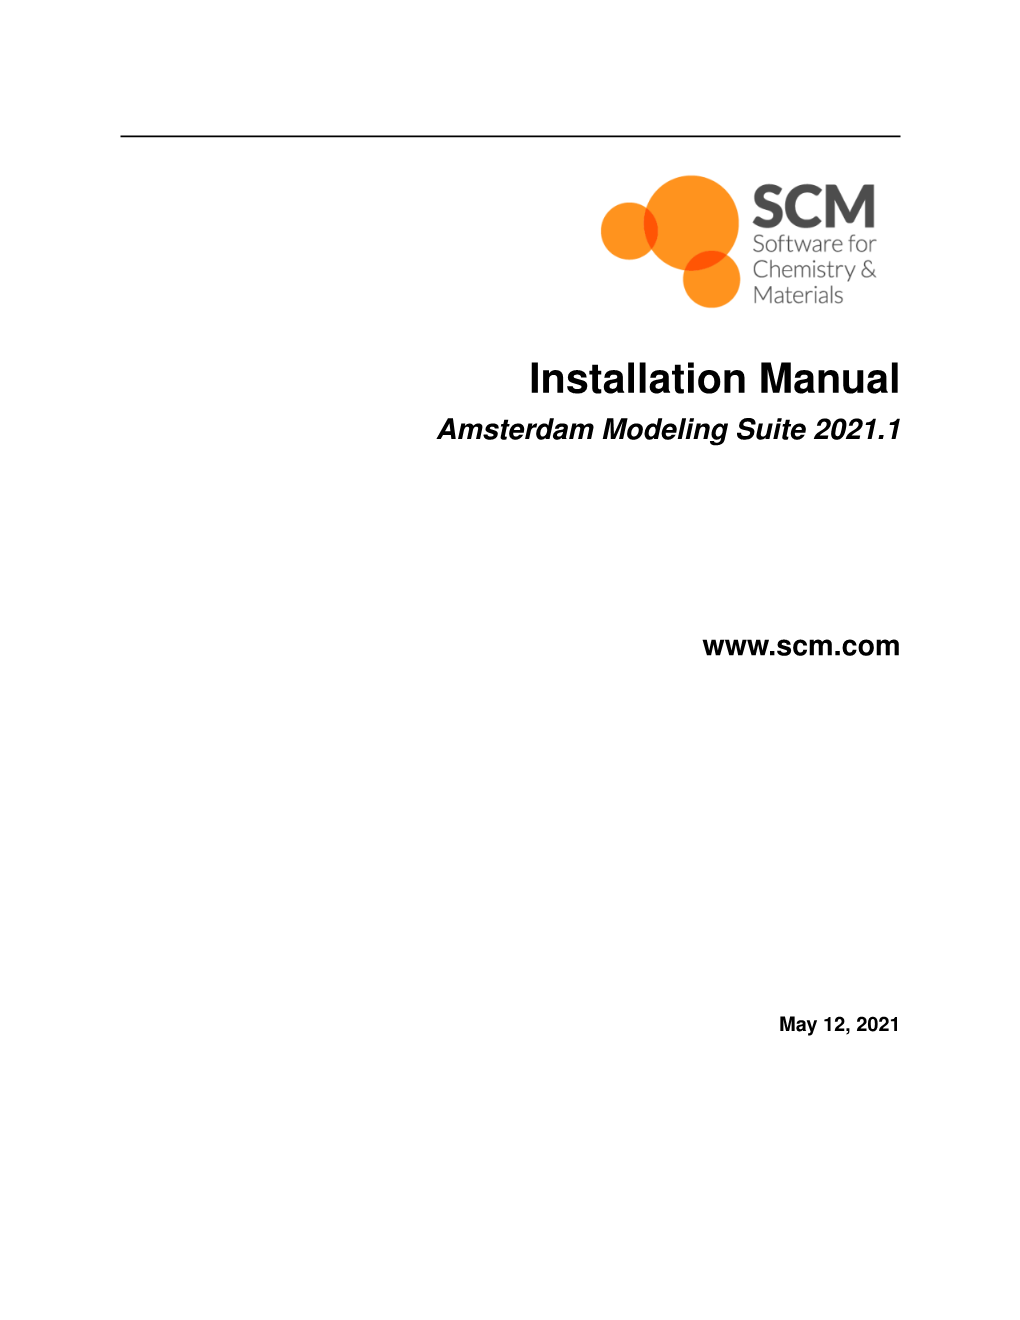 Installation Manual Amsterdam Modeling Suite 2021.1